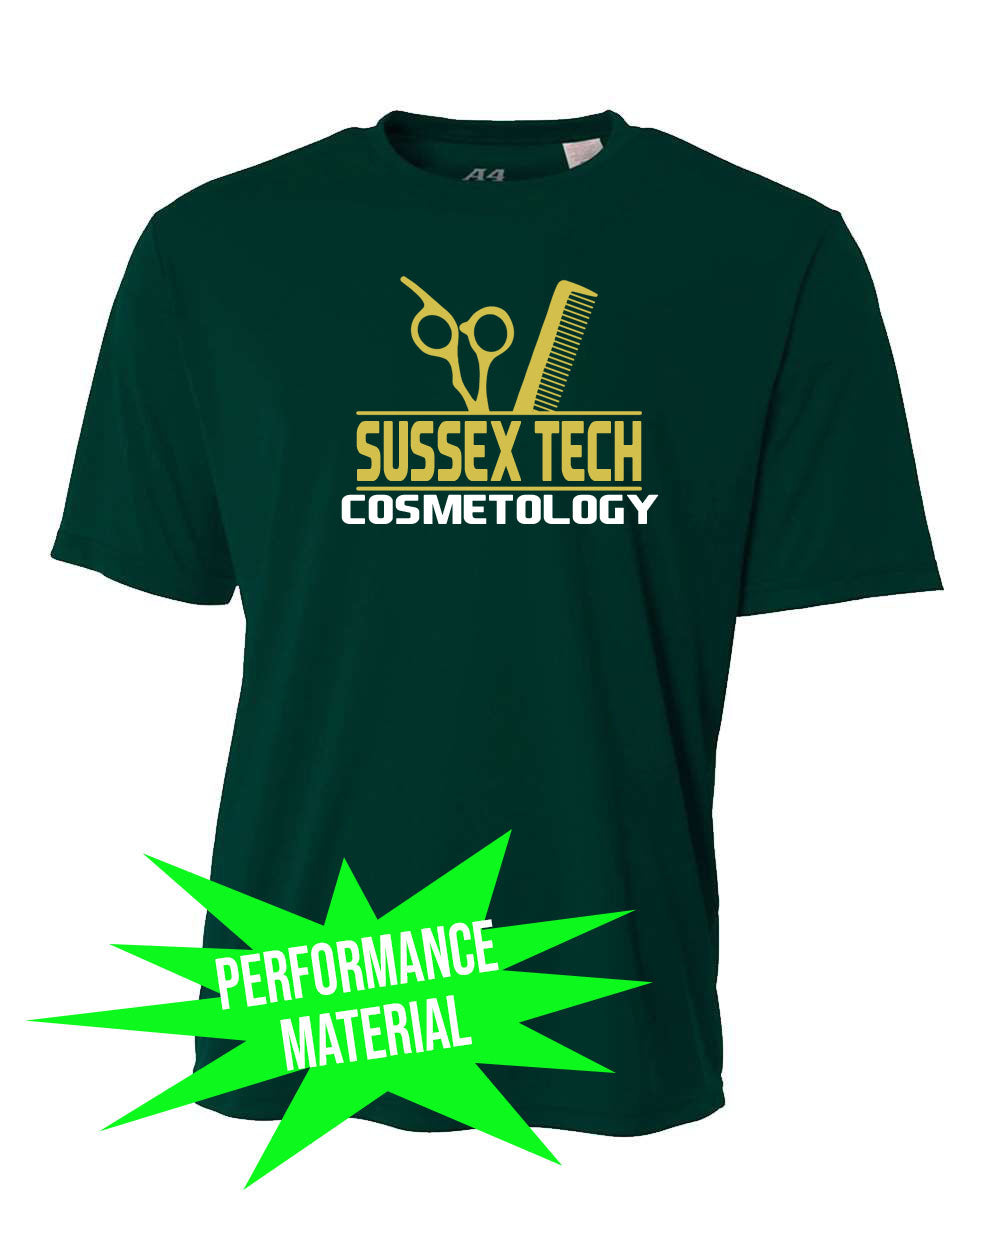 Sussex Tech Cosmetology Performance Material design 3 T-Shirt